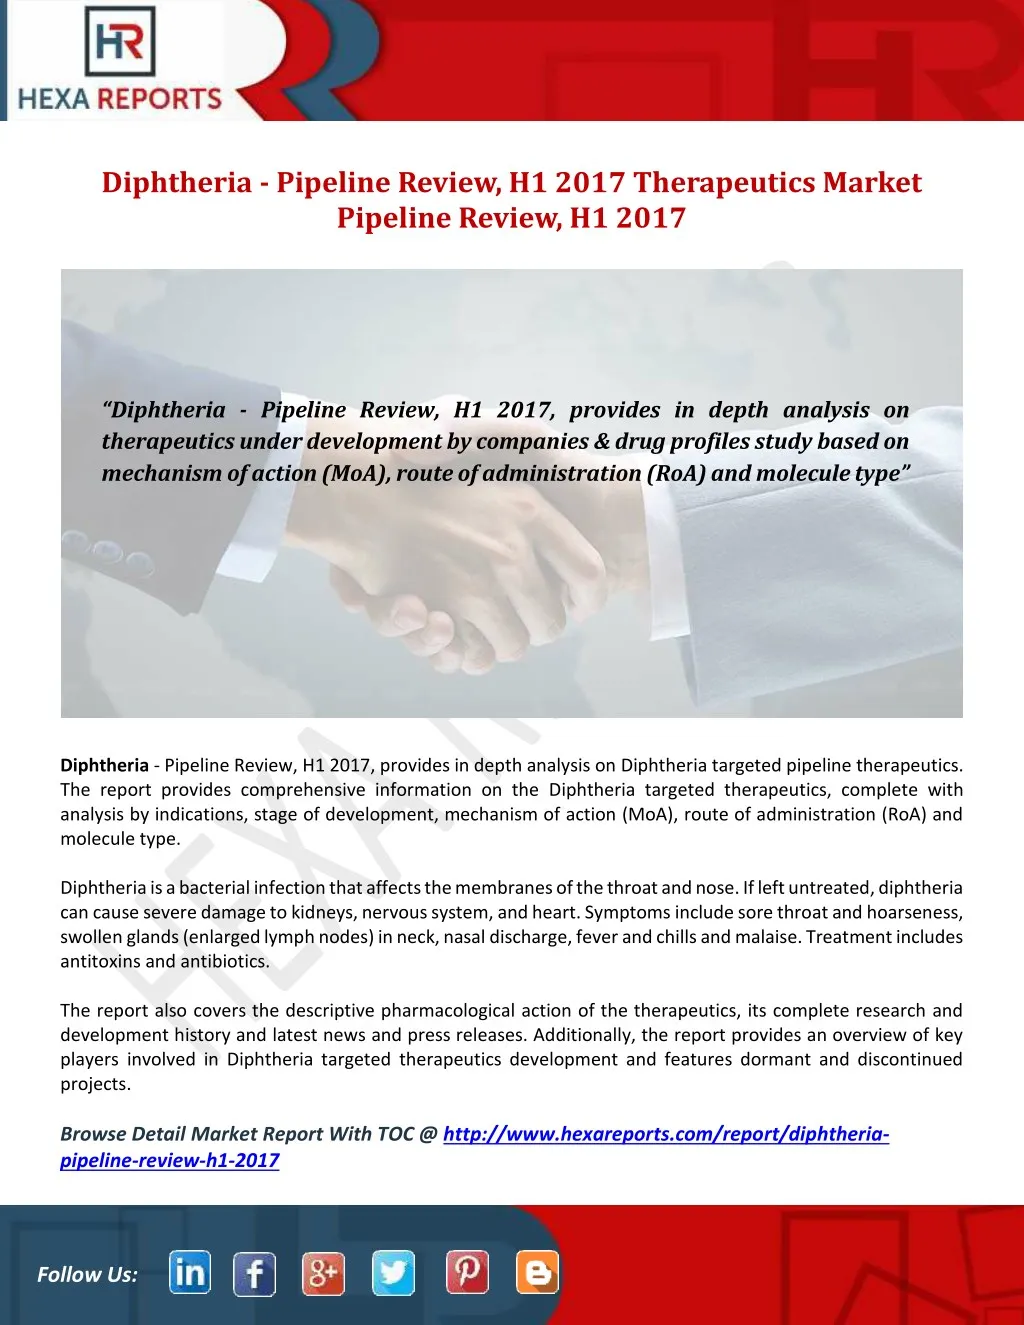 diphtheria pipeline review h1 2017 therapeutics